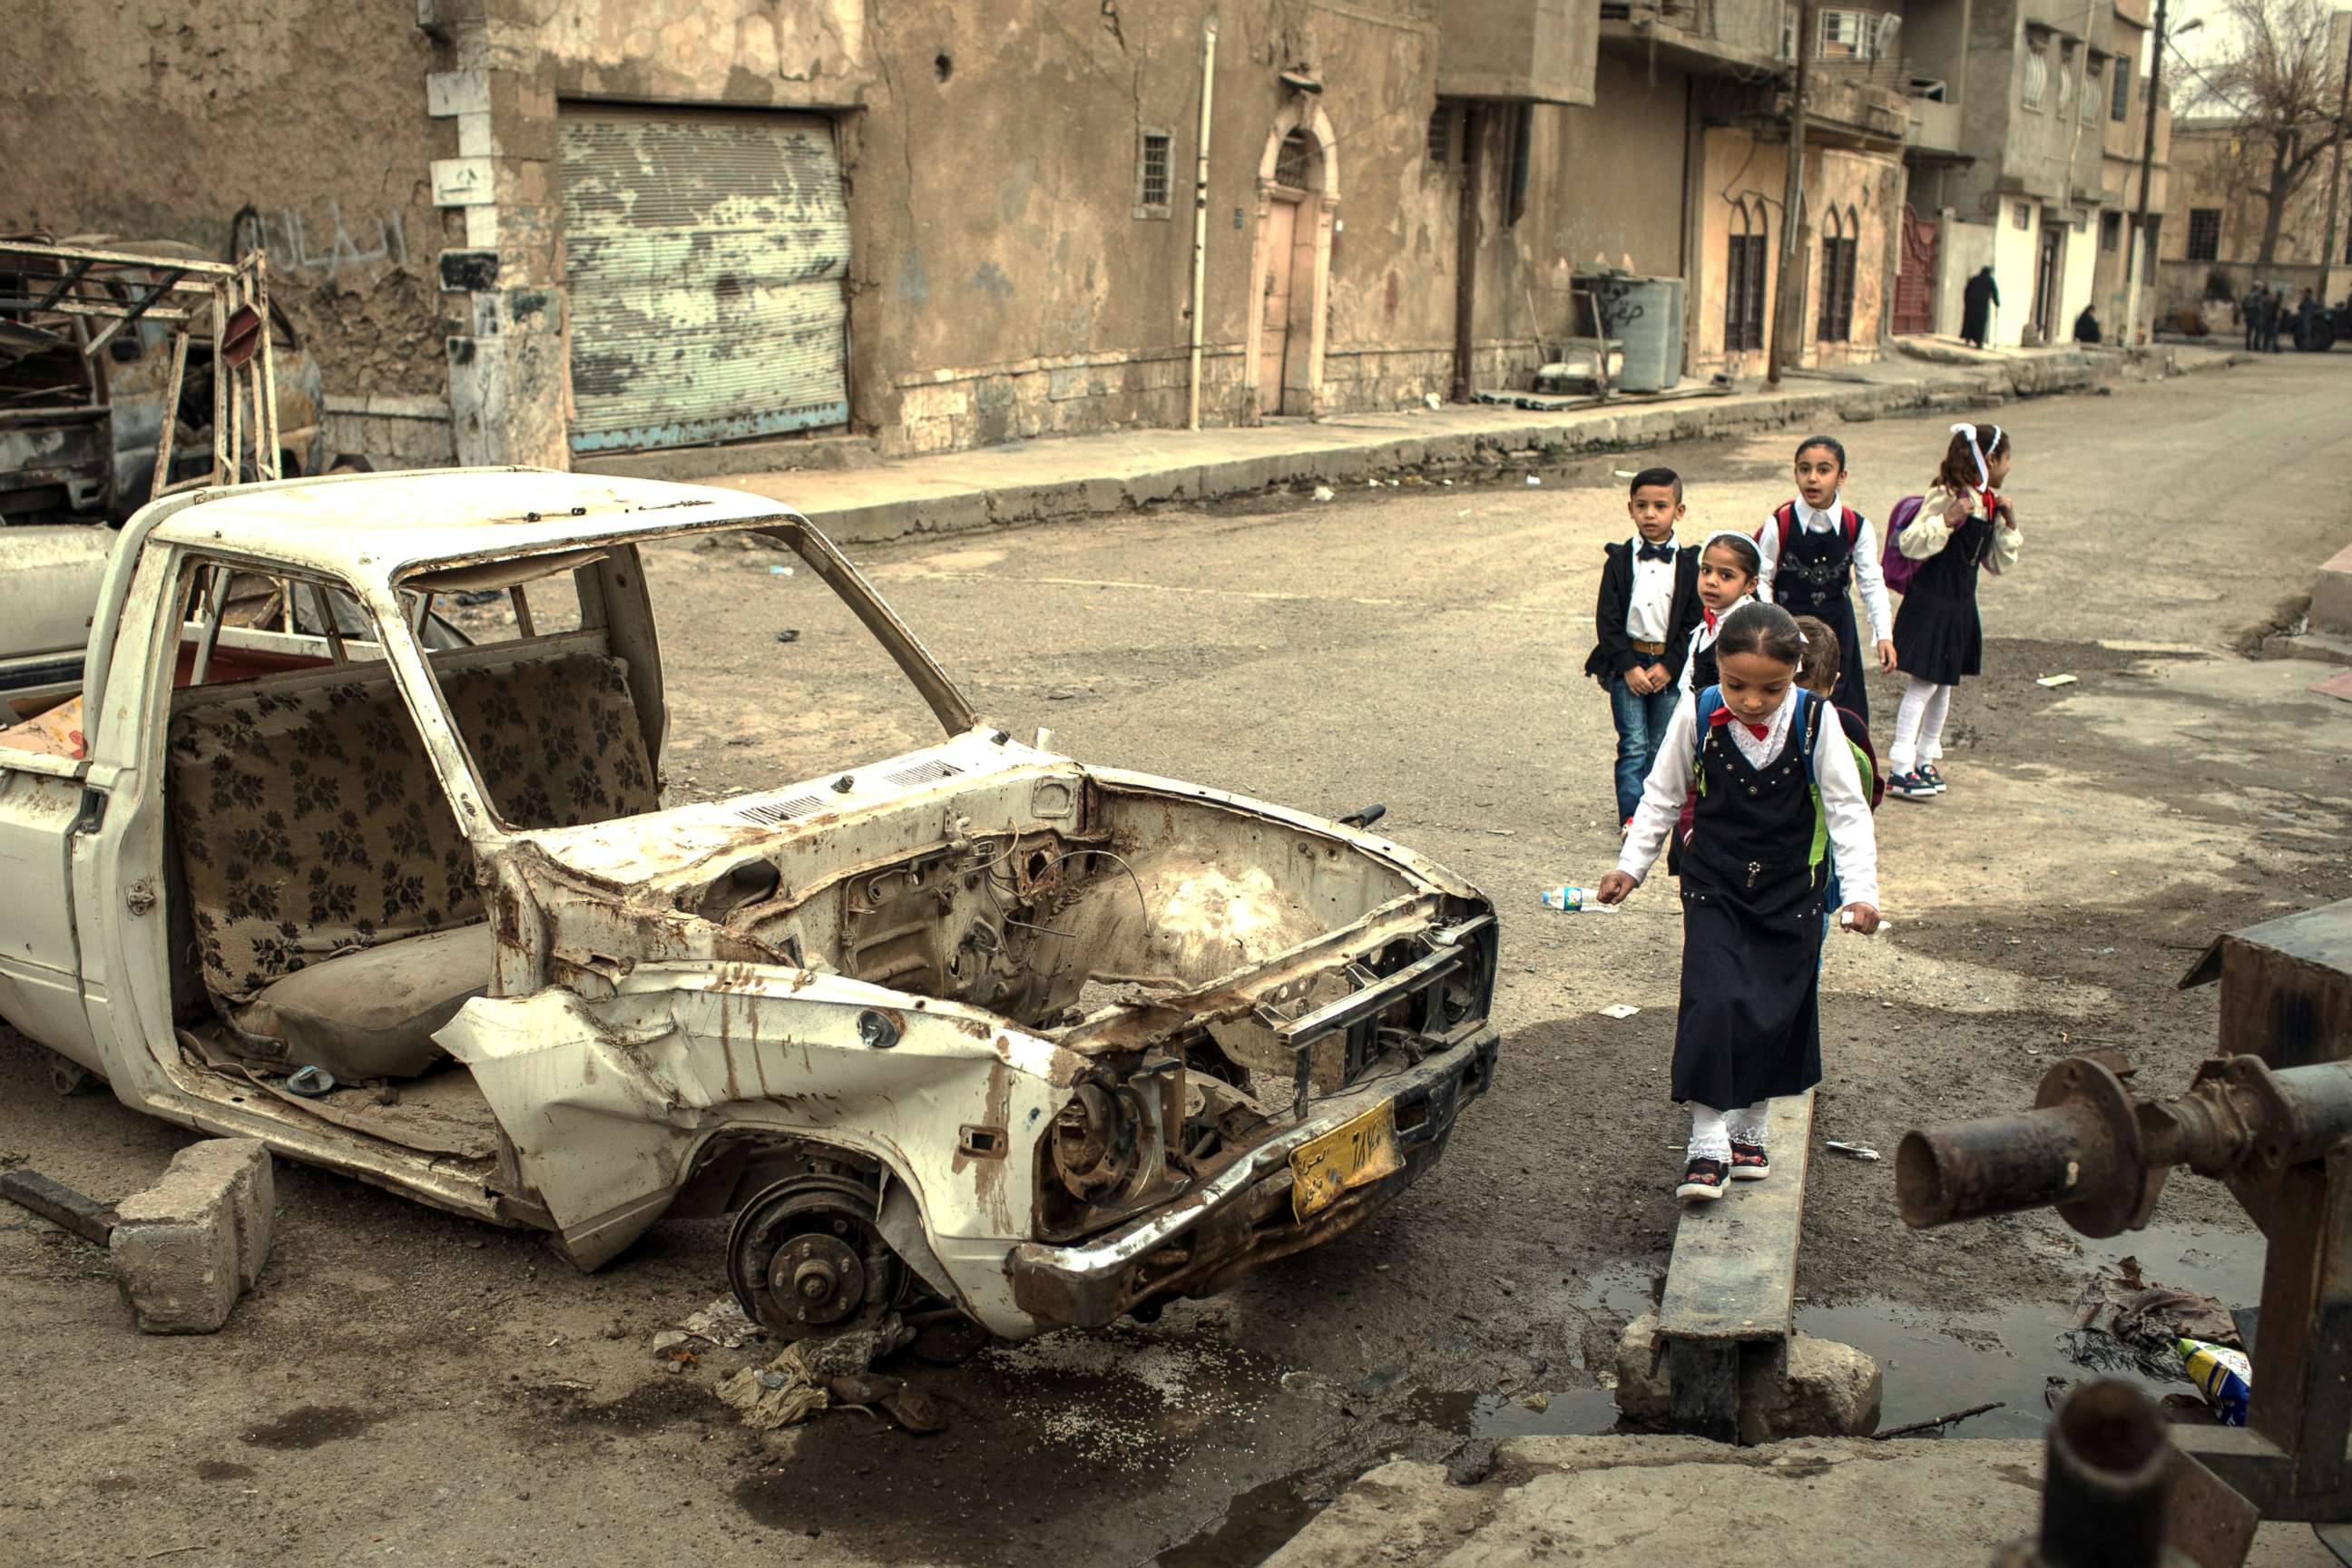 PHOTO: Children walk to school past destroyed cars in West Mosul on Nov. 6, 2017.